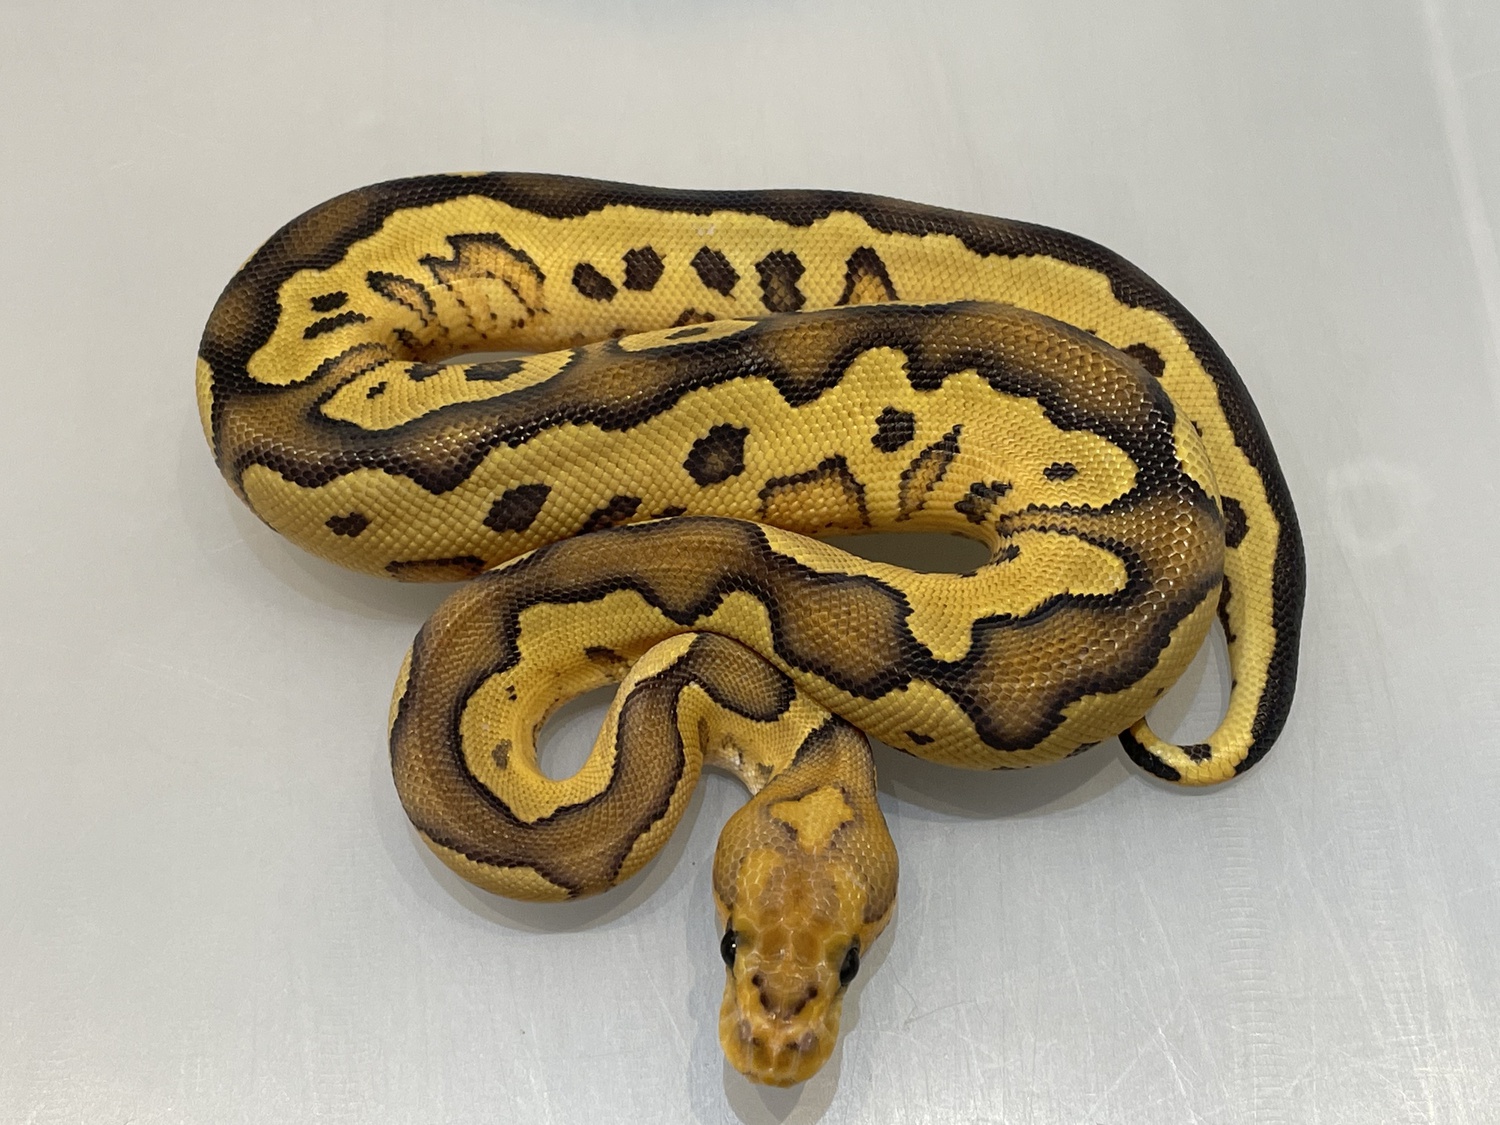 Fire Wookie Clown Ball Python by Brock Wagner Reptiles